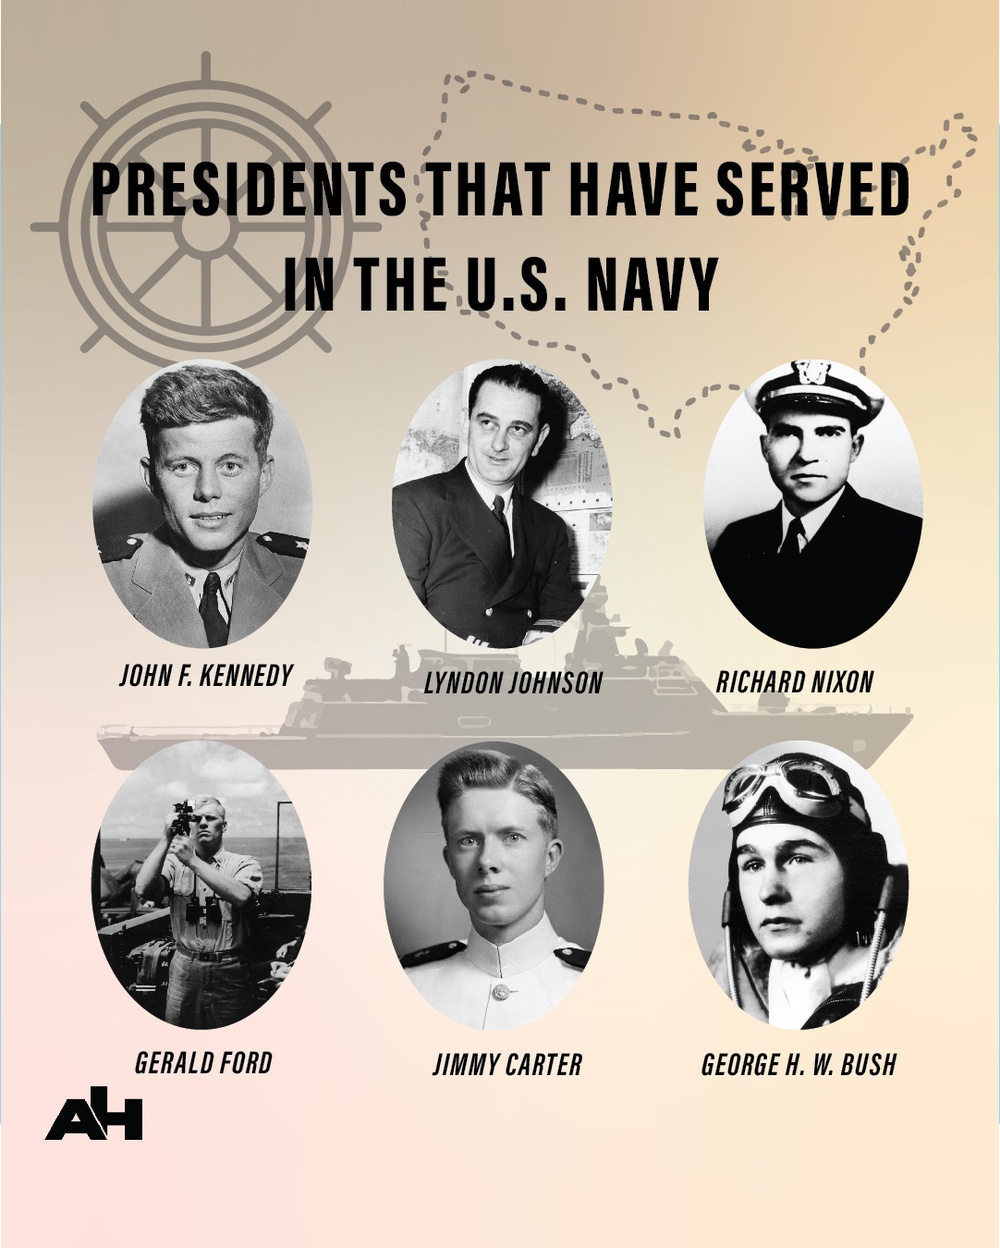 Presidents that have served in the U.S. Navy